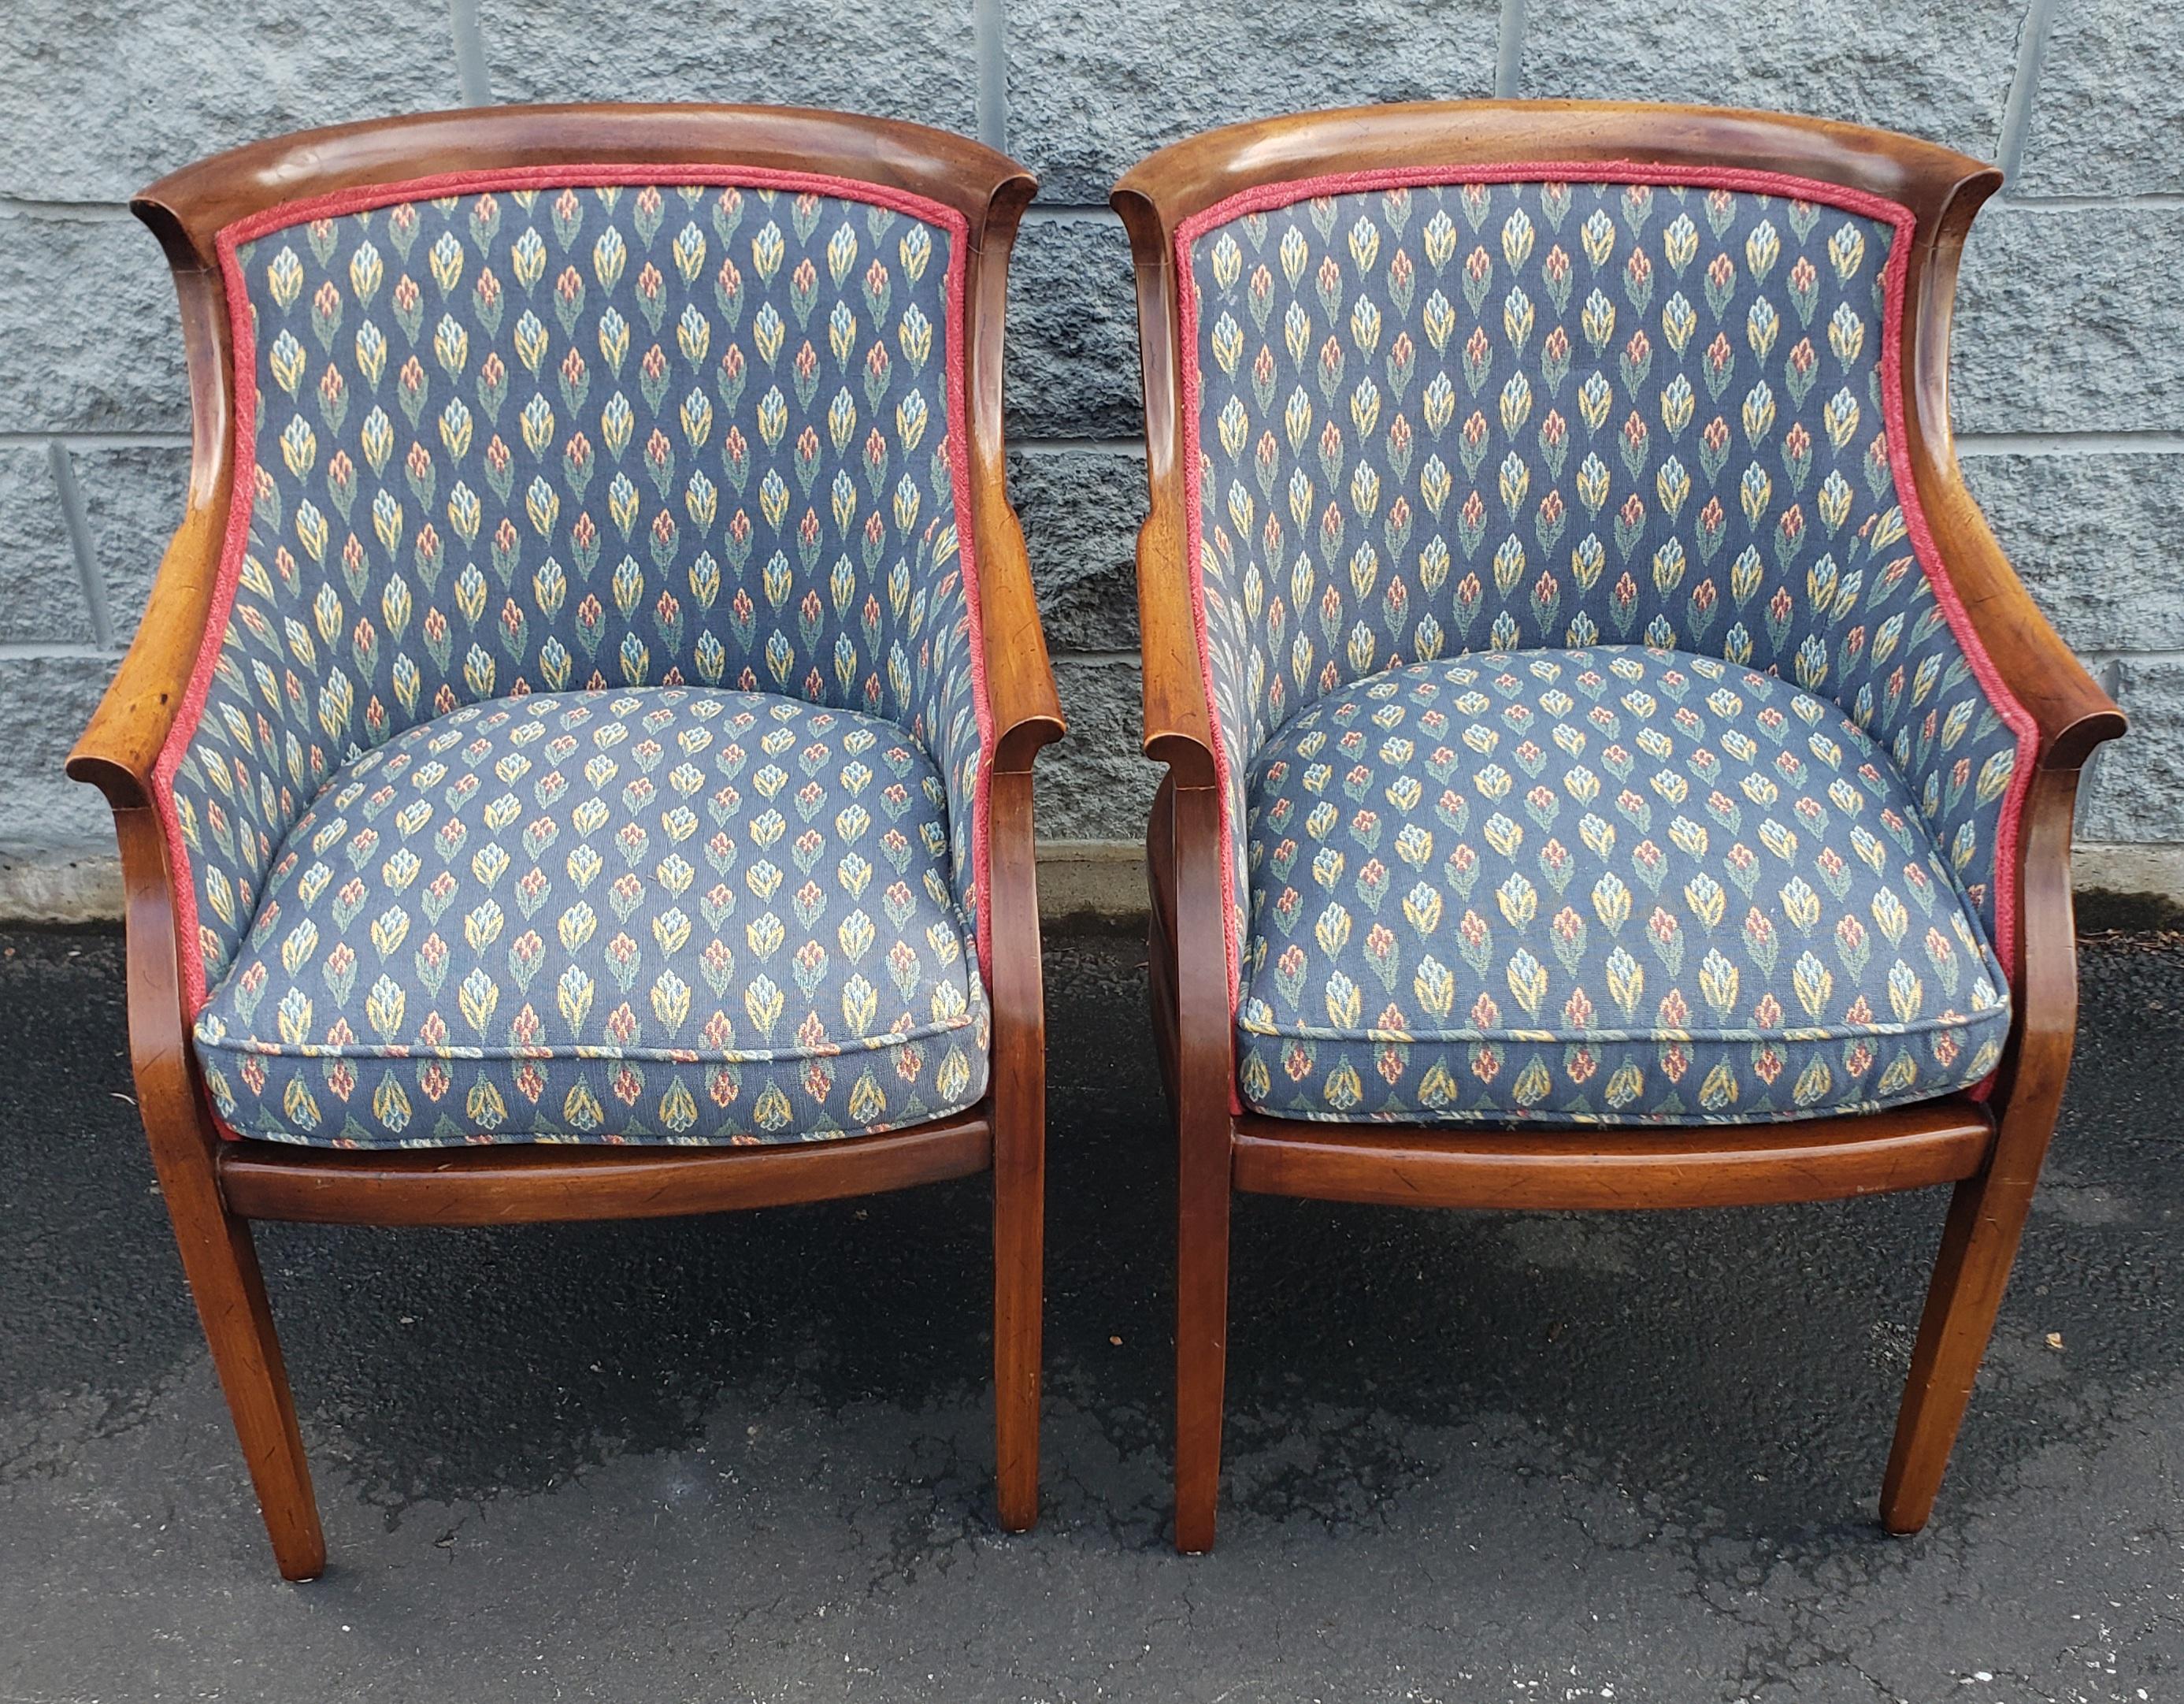 A Pair of Federal Style mahogany barrel-back upholstered seat and back armchairs. 
Very good vintage condition. Double layer seat. Very comfortable seat and upholstery in great shape.
Measures 23.25